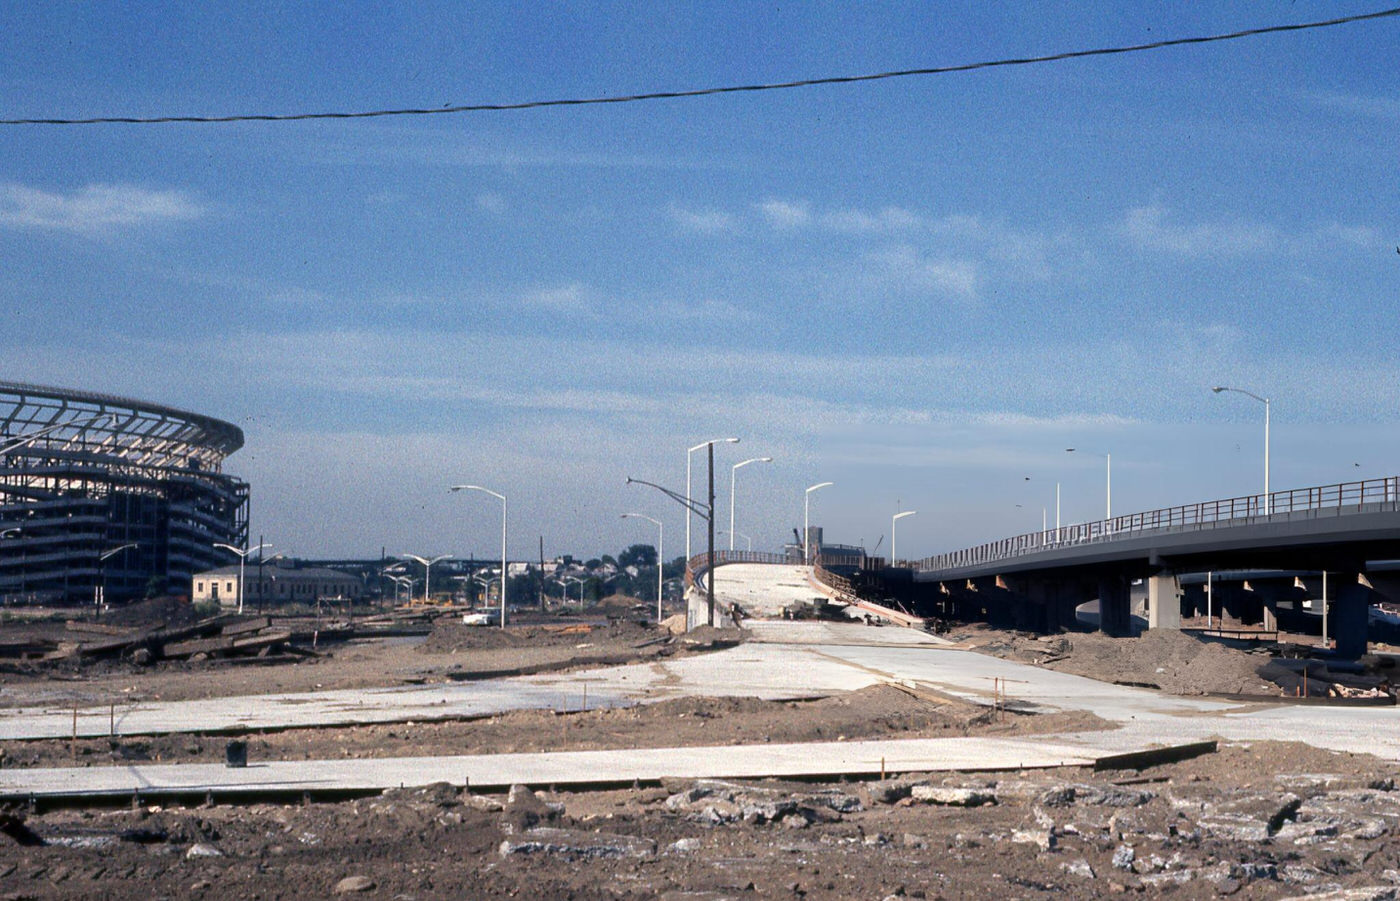 Construction Of New Exit And Entrance Ramps For Municipal Stadium On The Grand Central Parkway, Queens, 1963.